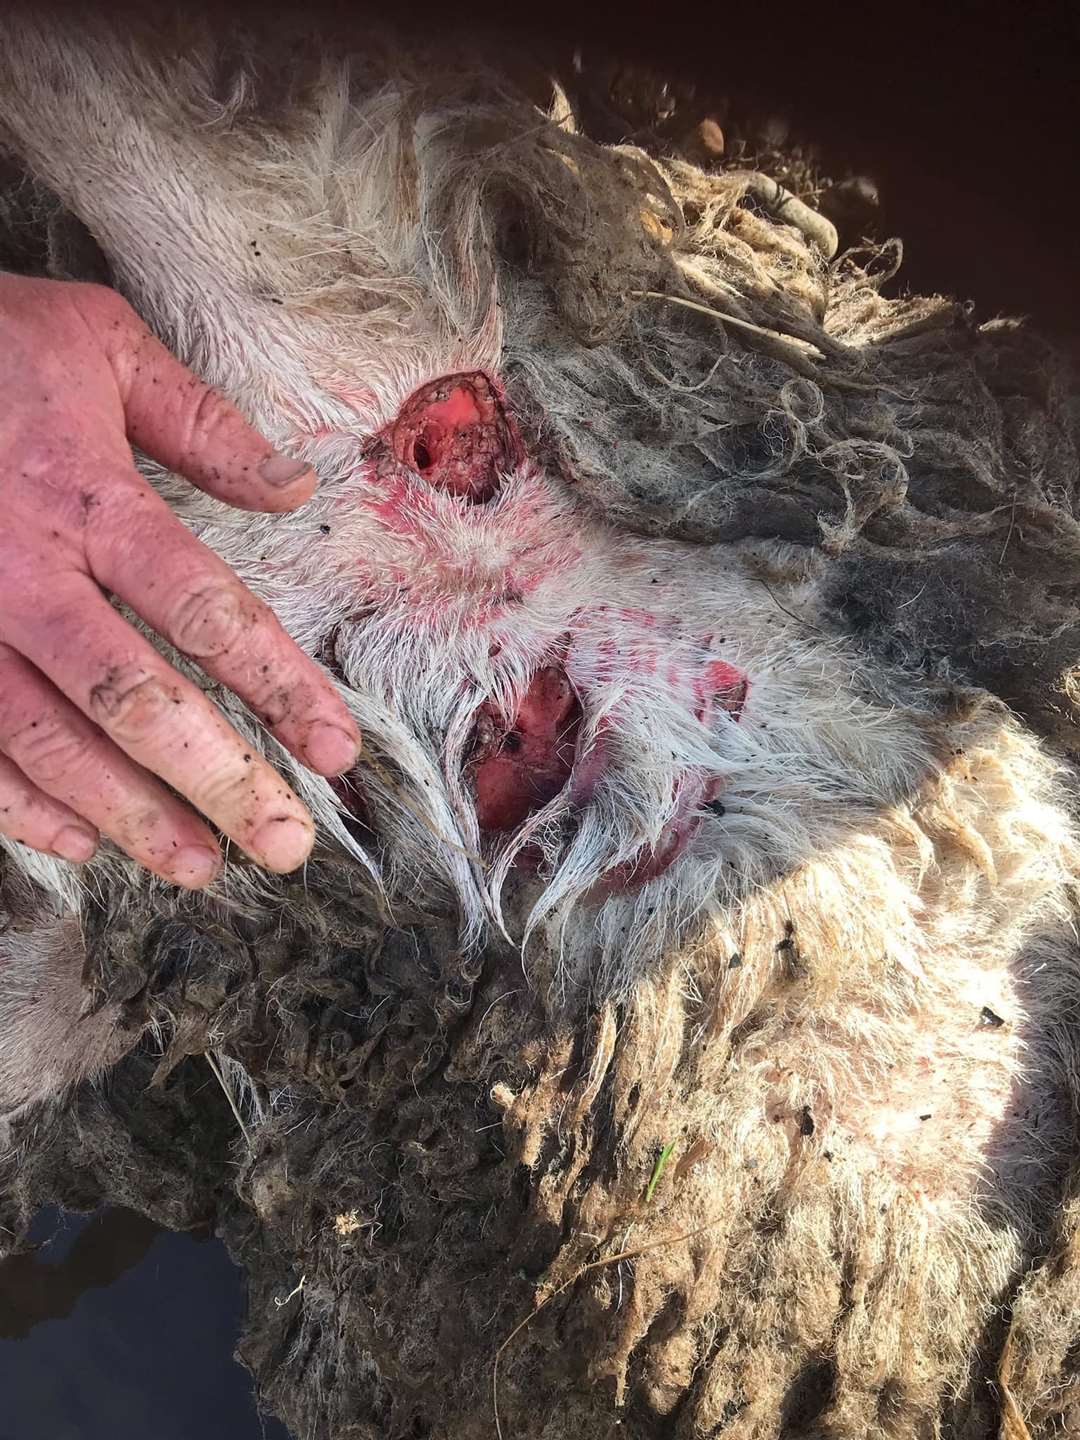 Anna Munro, of Kingussie, posted this week: "Our pregnant ewes were attacked today and very badly mauled. This happens every year and it’s so traumatising for our ewes and us. If you are a dog owner I would ask that you keep your dog under total control, so that we don’t have to deal with this again." Local crofter and community council chairman Ruaridh Ormiston said: "Please, please keep your dogs in leads. This is Kingussie - ewes are heavily pregnant at this time of year."